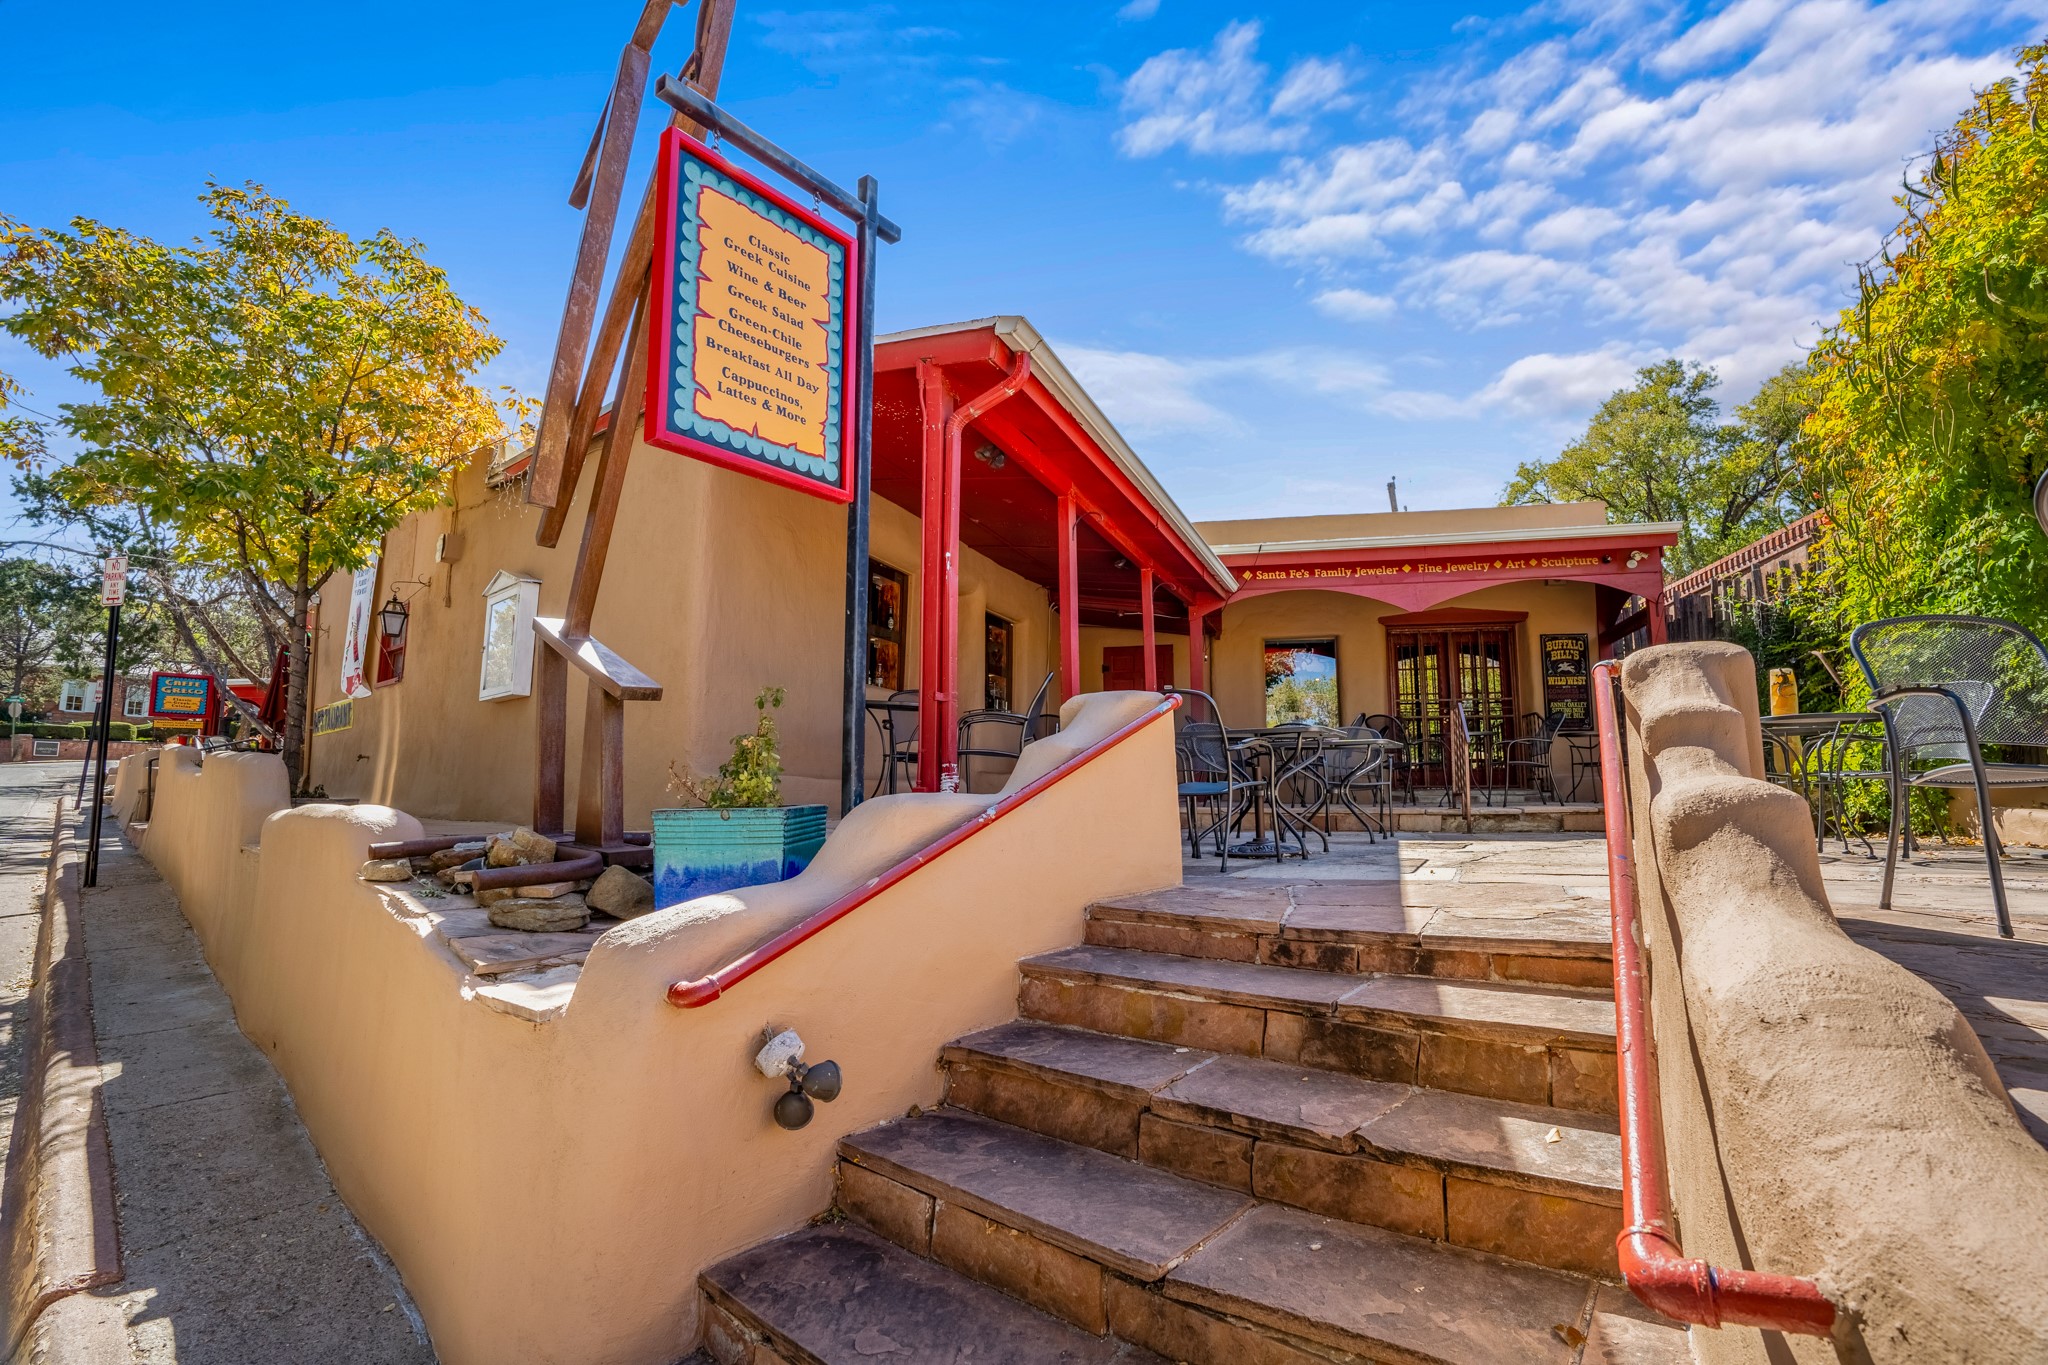 233 CANYON Road, Santa Fe, New Mexico 87501, 3 Bedrooms Bedrooms, ,8 BathroomsBathrooms,Residential,For Sale,233 CANYON Road,202341475